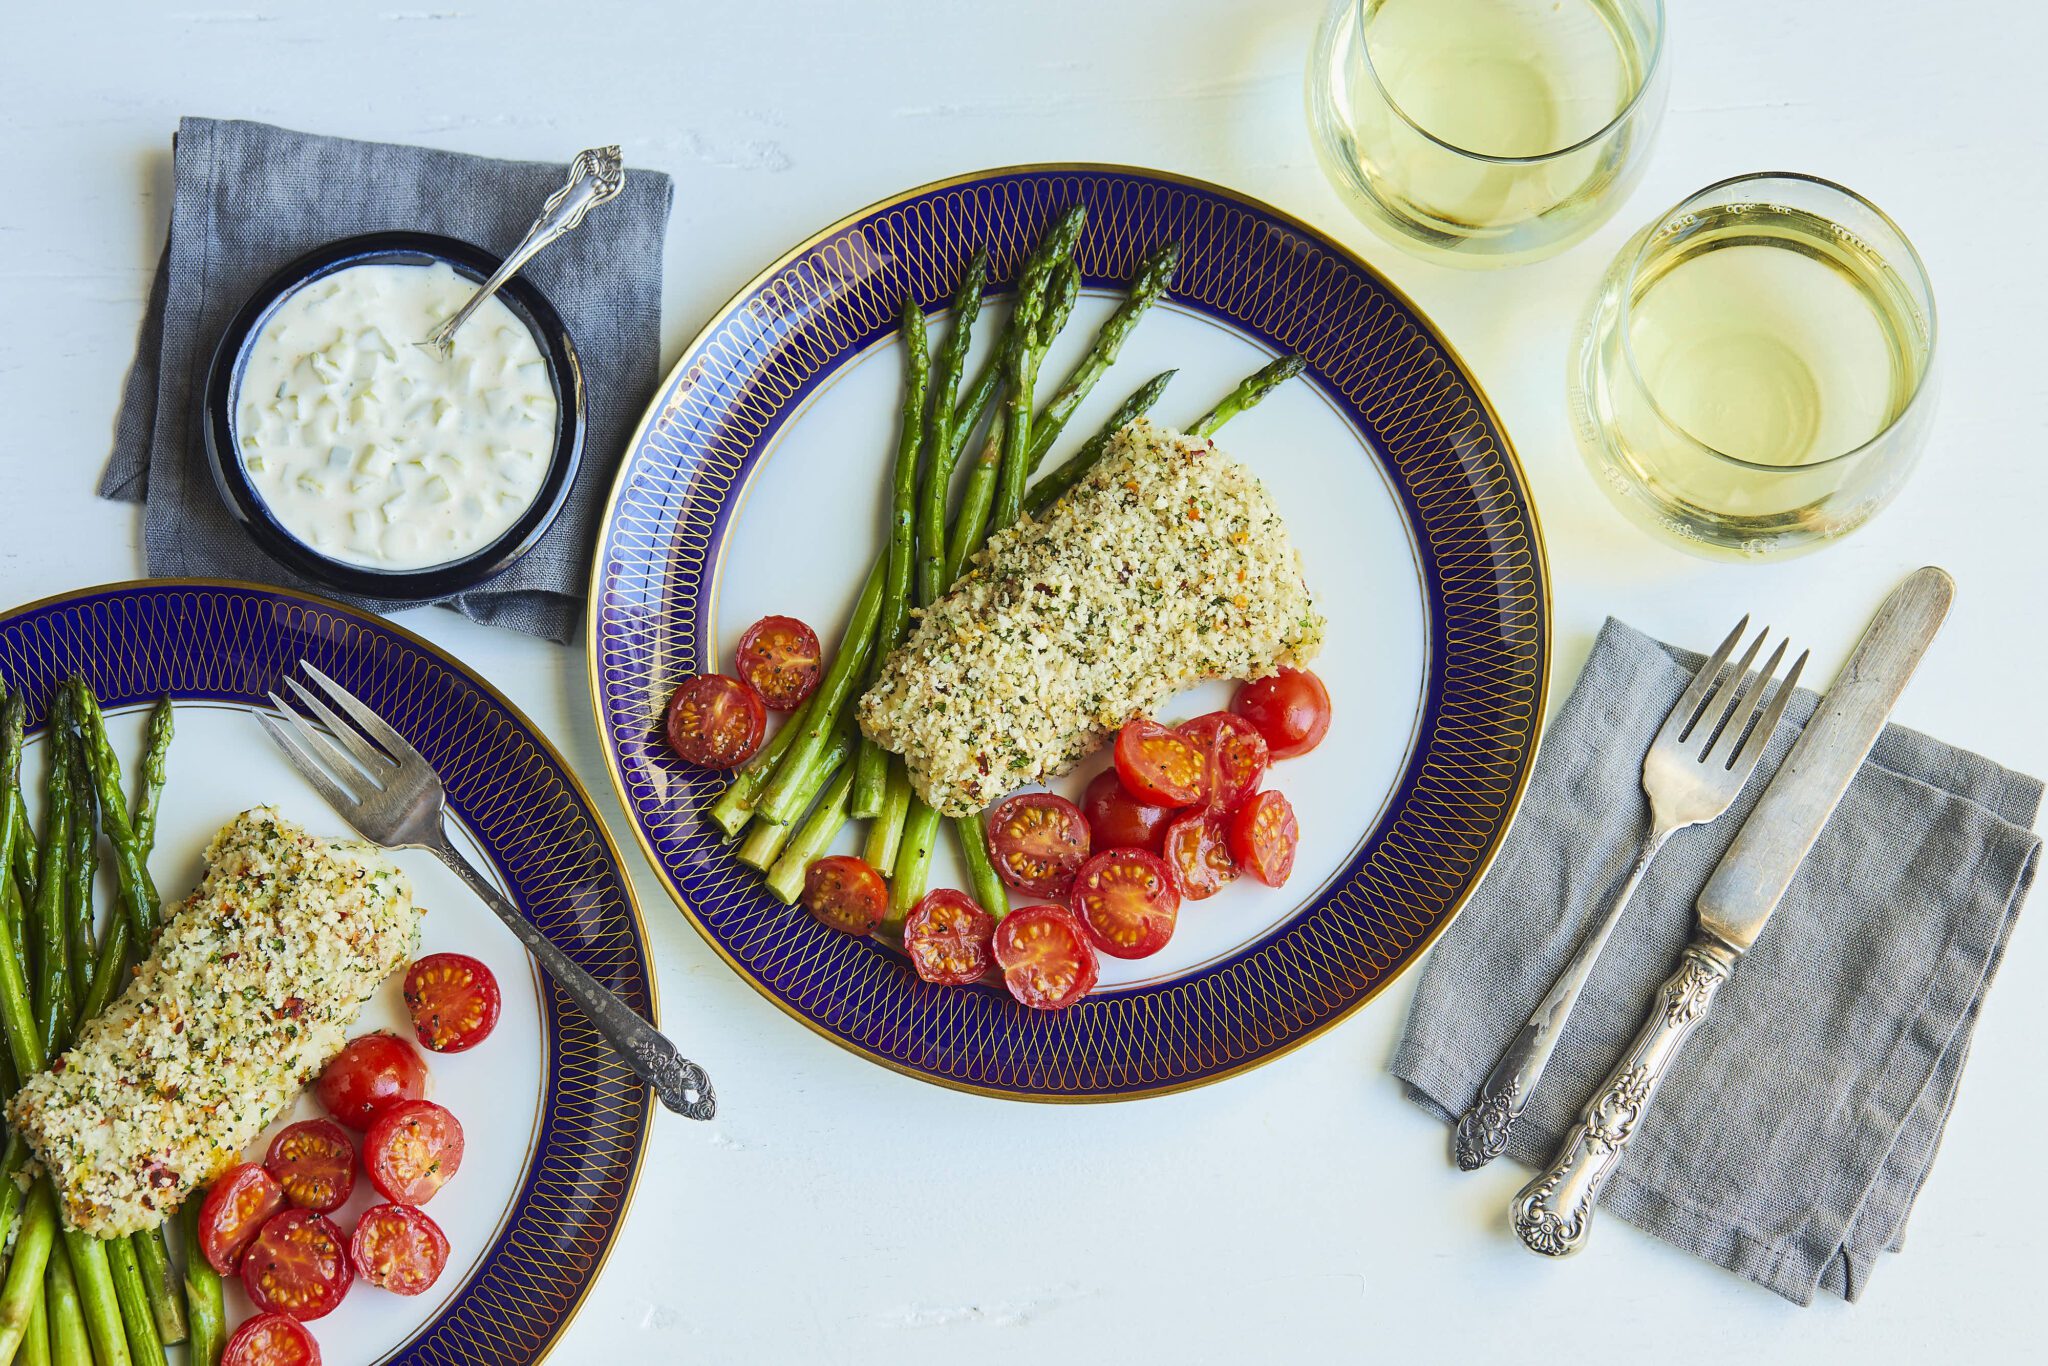 You are currently viewing Sheet Pan Supper: Panko Crusted Fish Filet with Asparagus and Tomatoes